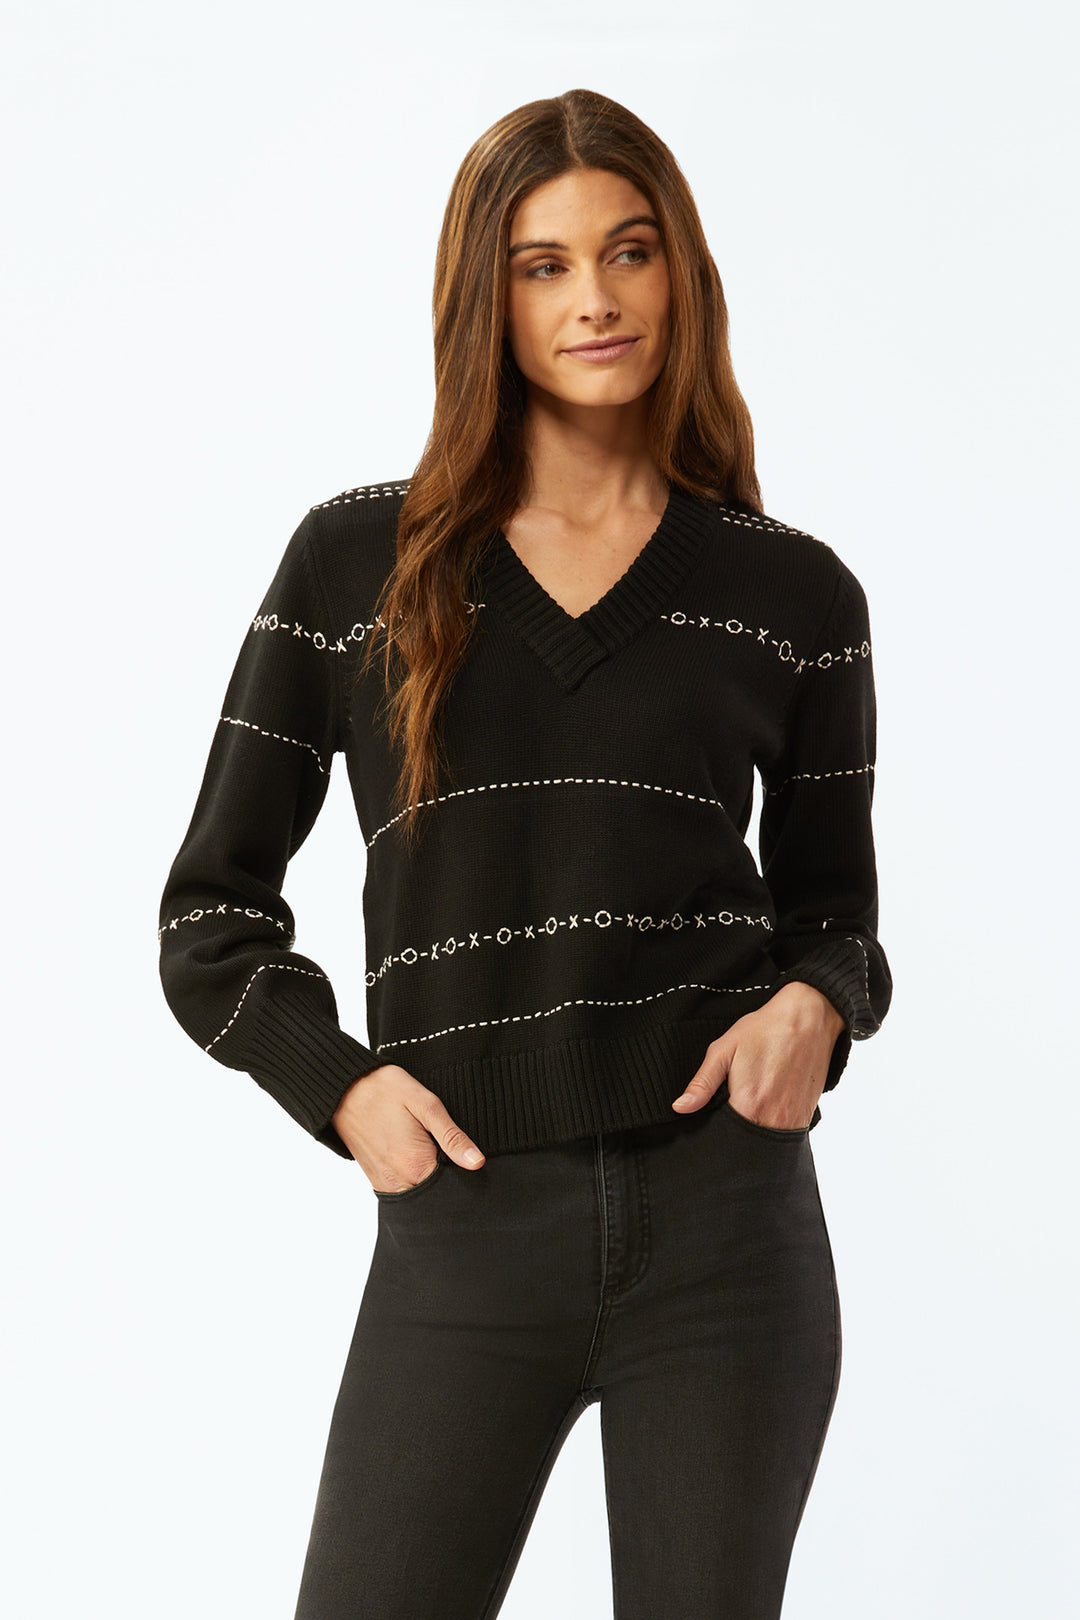 Xs And Os Embroidered Sweater - Black/Ecru